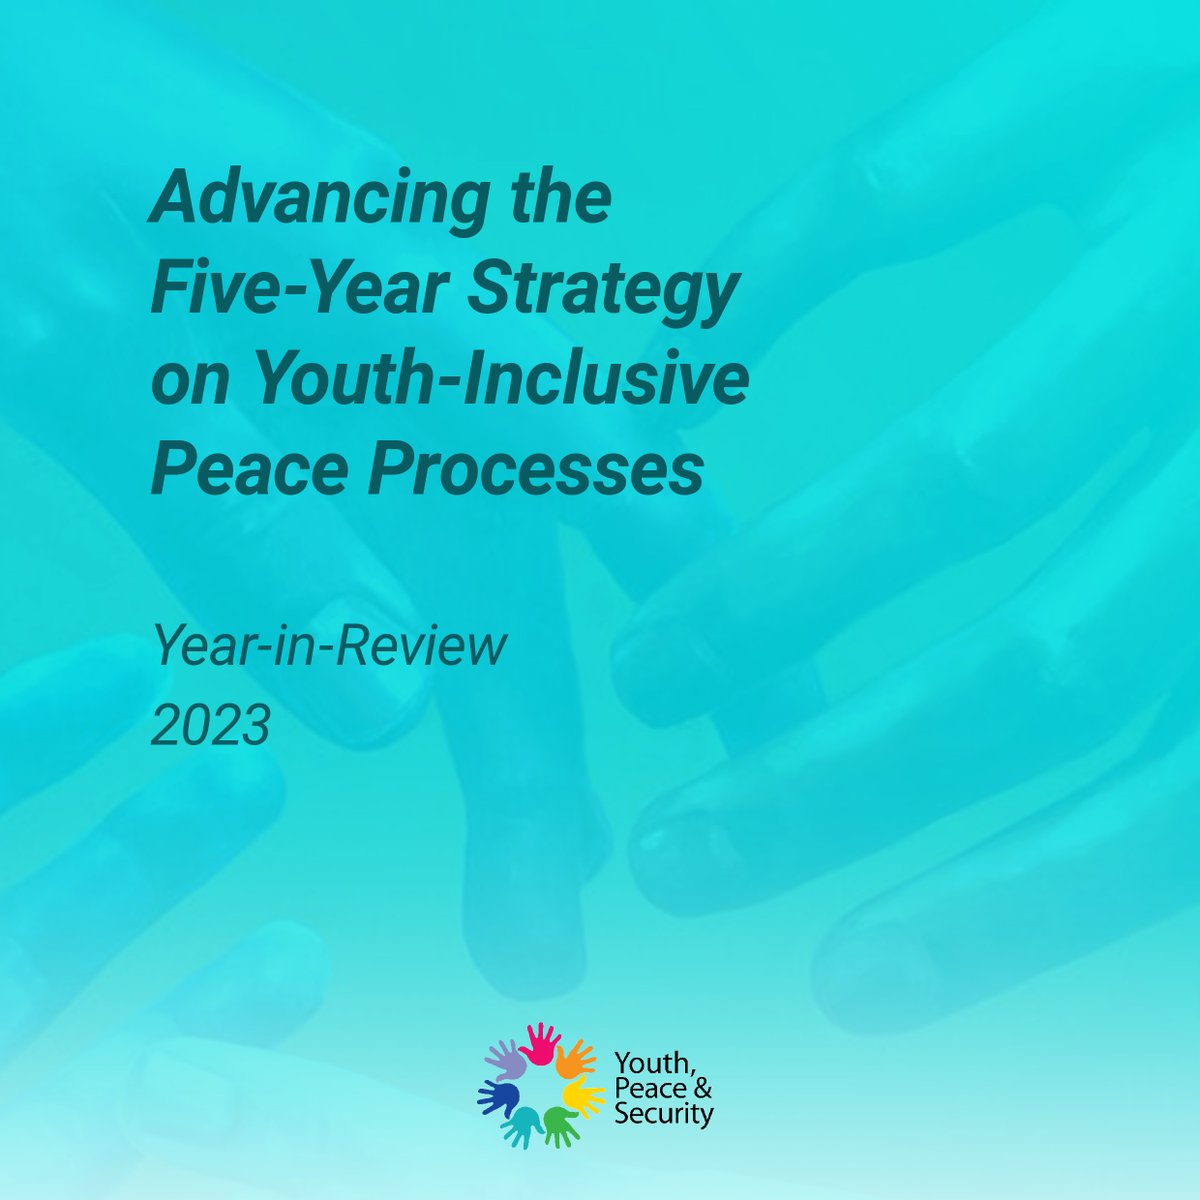 GNWP🟣 Recommends

📚Read the 'Year in Review' of the ISG for the 5⃣-year strategy on youth-inclusive peace🕊️ processes to learn about #Youth4Peace's initiatives in mediation👥 + peace process, including GNWP's #YoungWomenLead🚺 initiatives in 🇨🇩🇧🇮

🔗 trello.com/c/krIOTxDj/140…